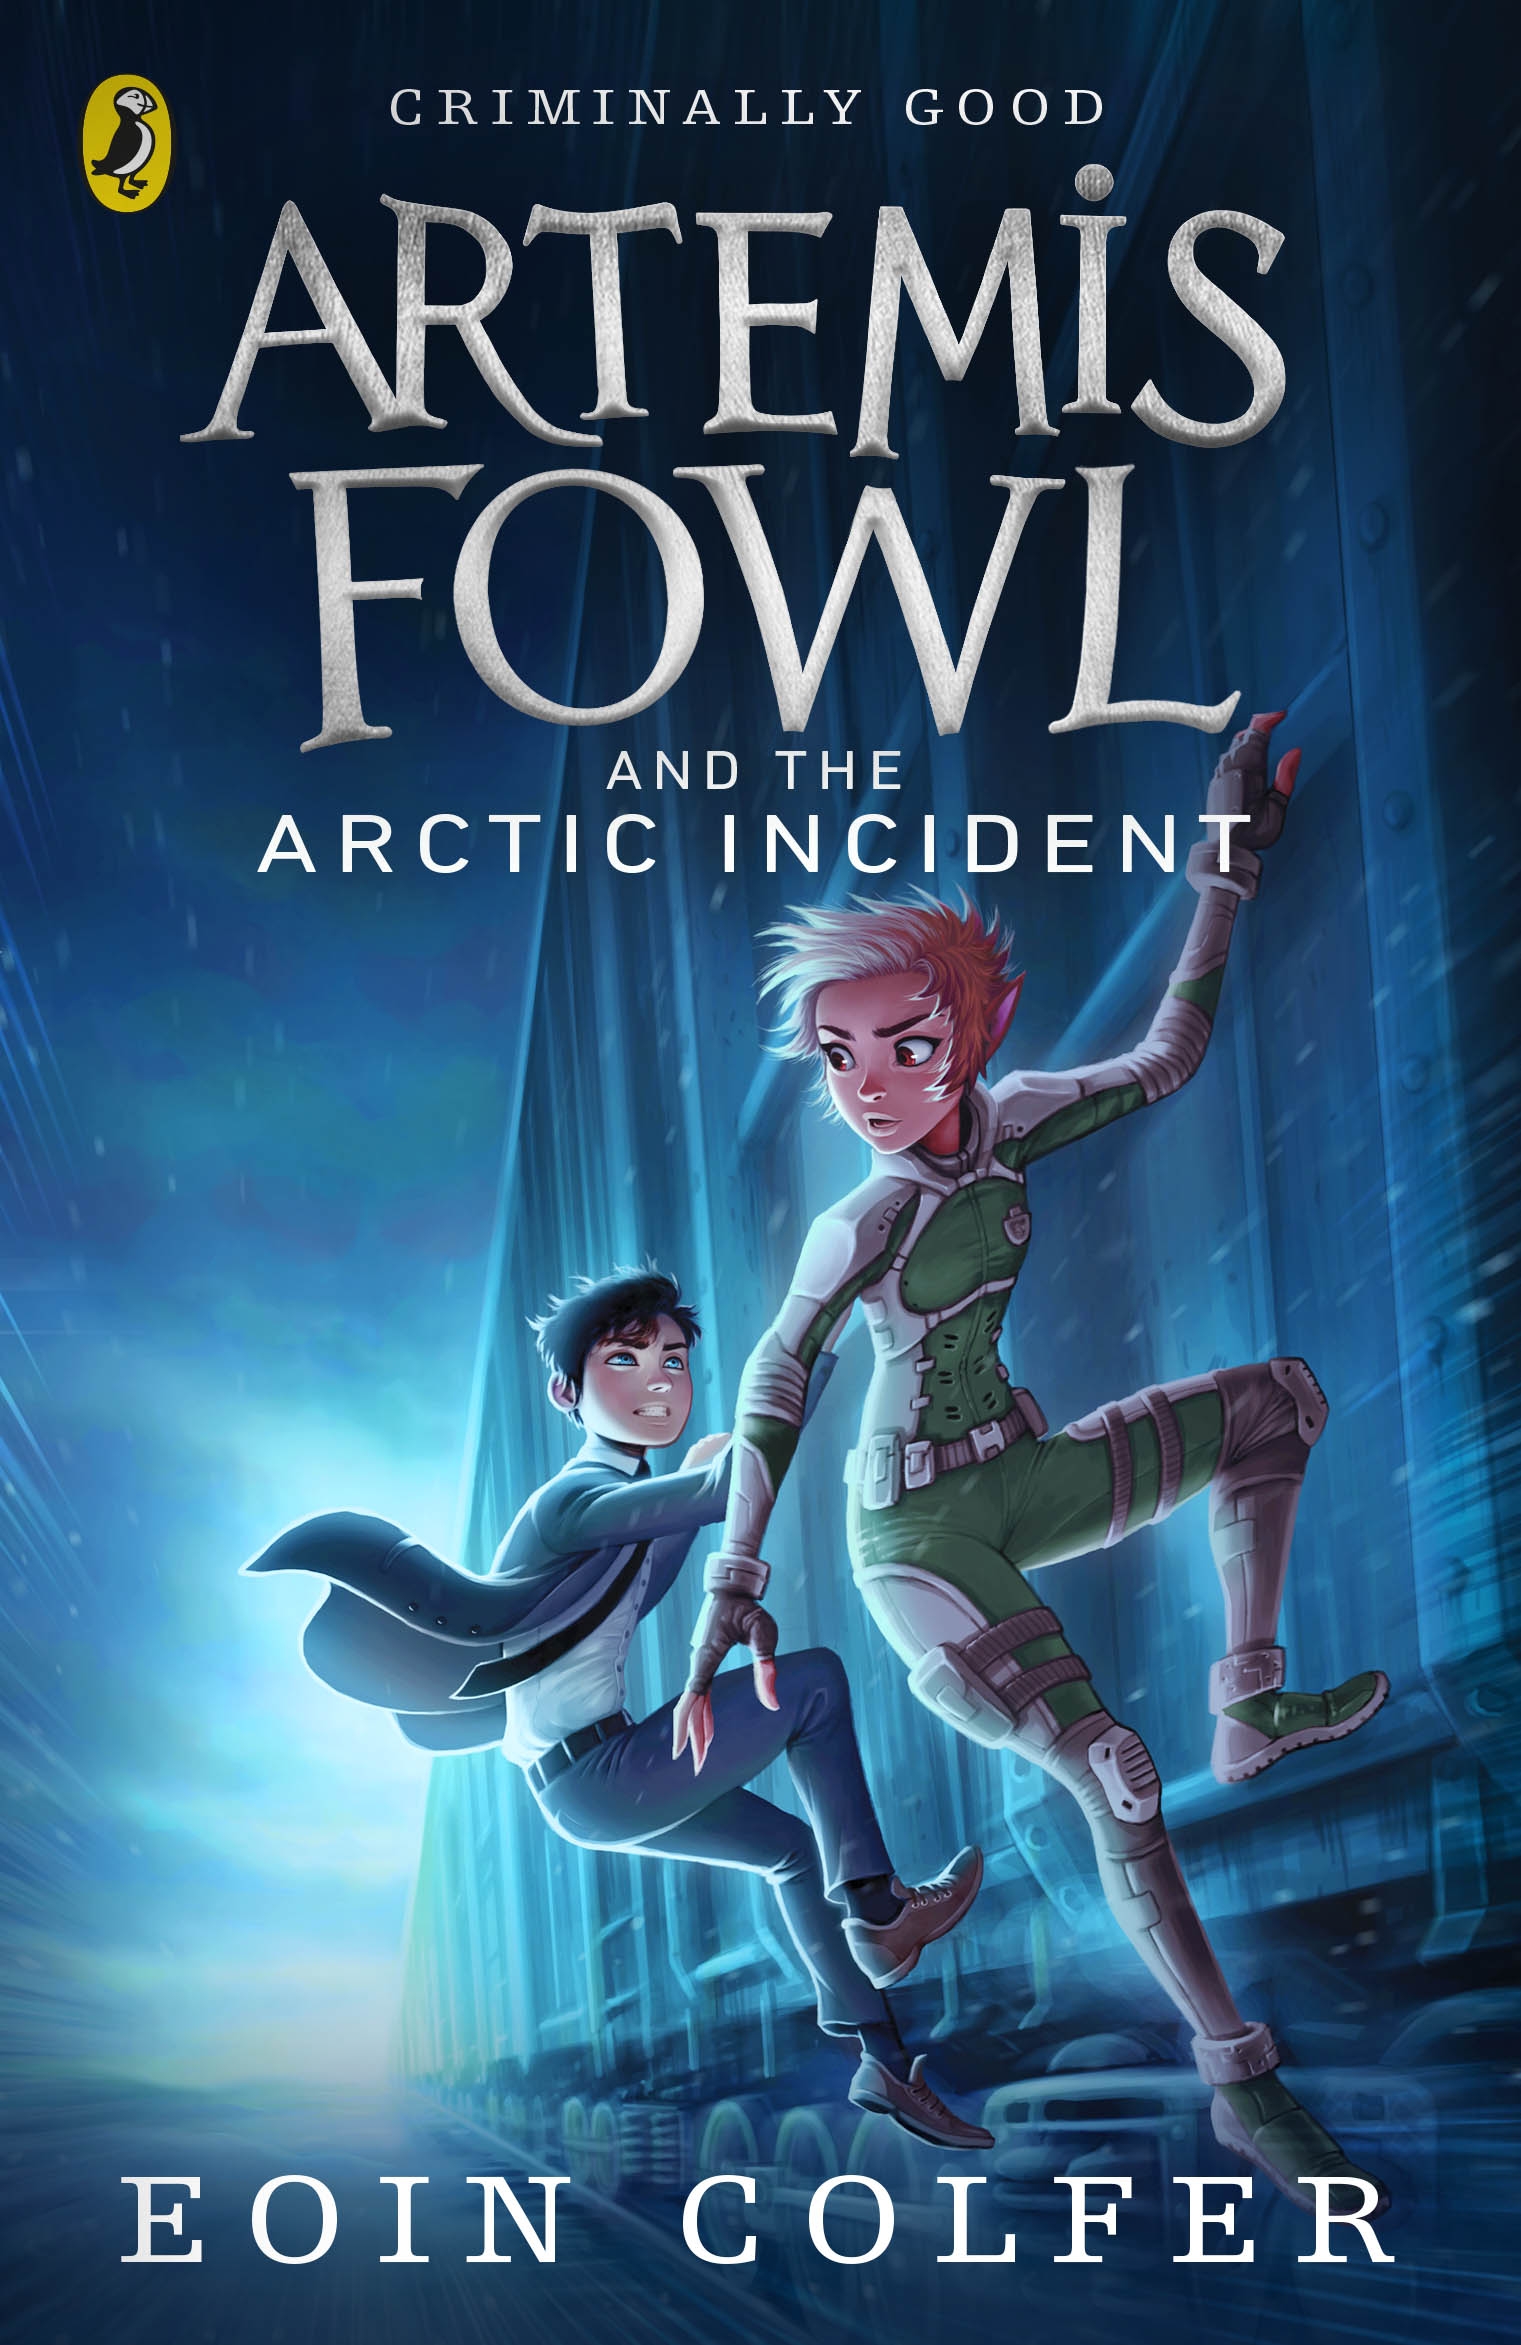 Publisher Penguin - The Arctic Incident(Artemis Fowl Series  Book 2) - Eoin Colfer